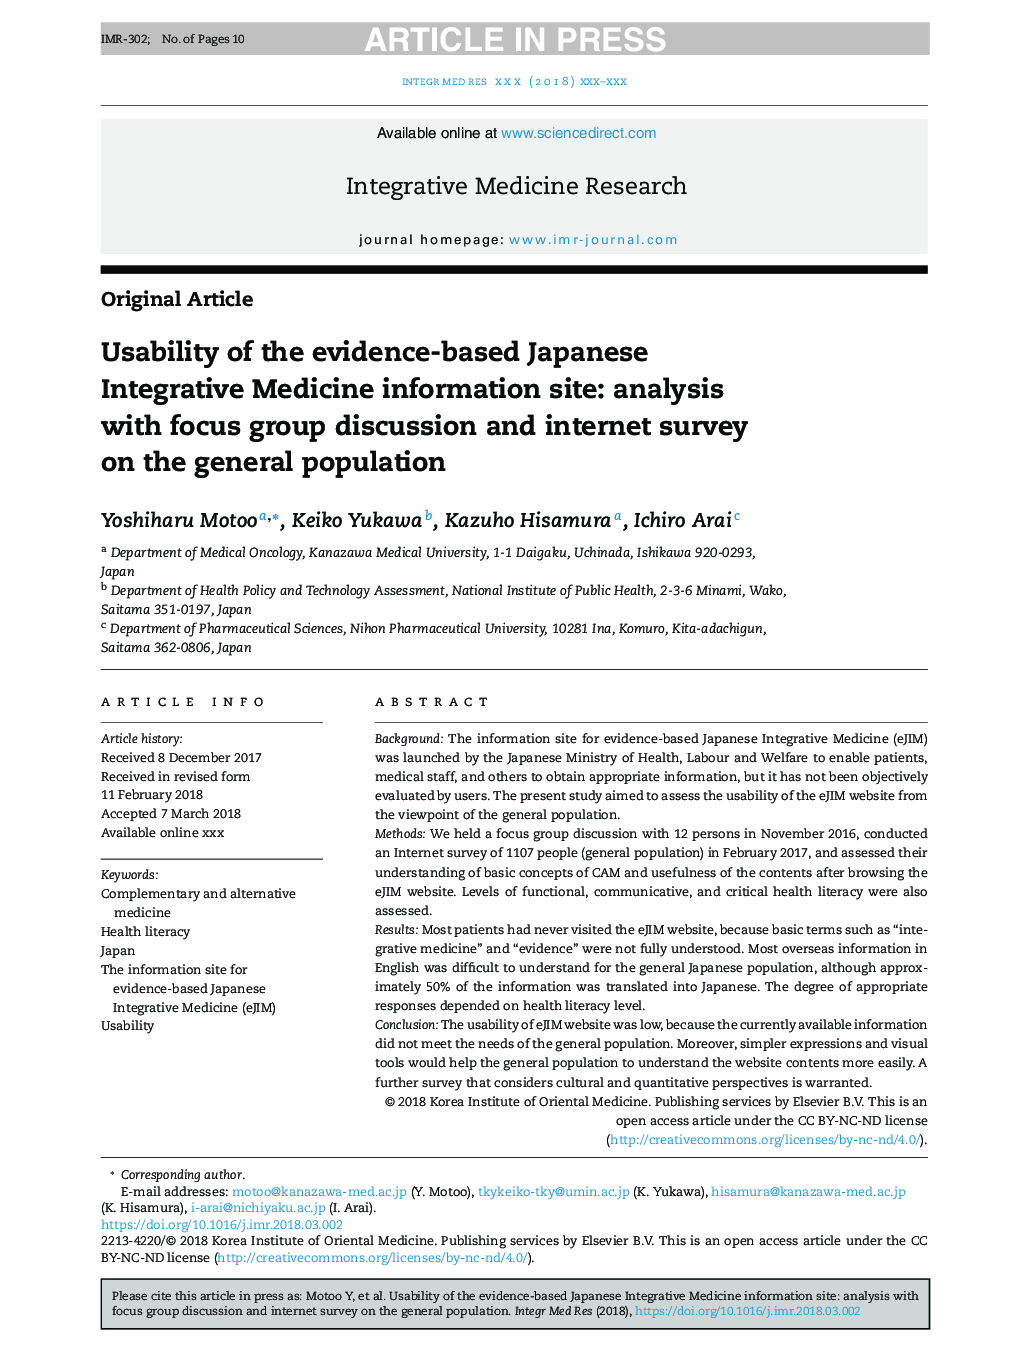 Usability of the evidence-based Japanese integrative medicine (eJIM) information site: analysis with focus group discussion and internet survey on the general population